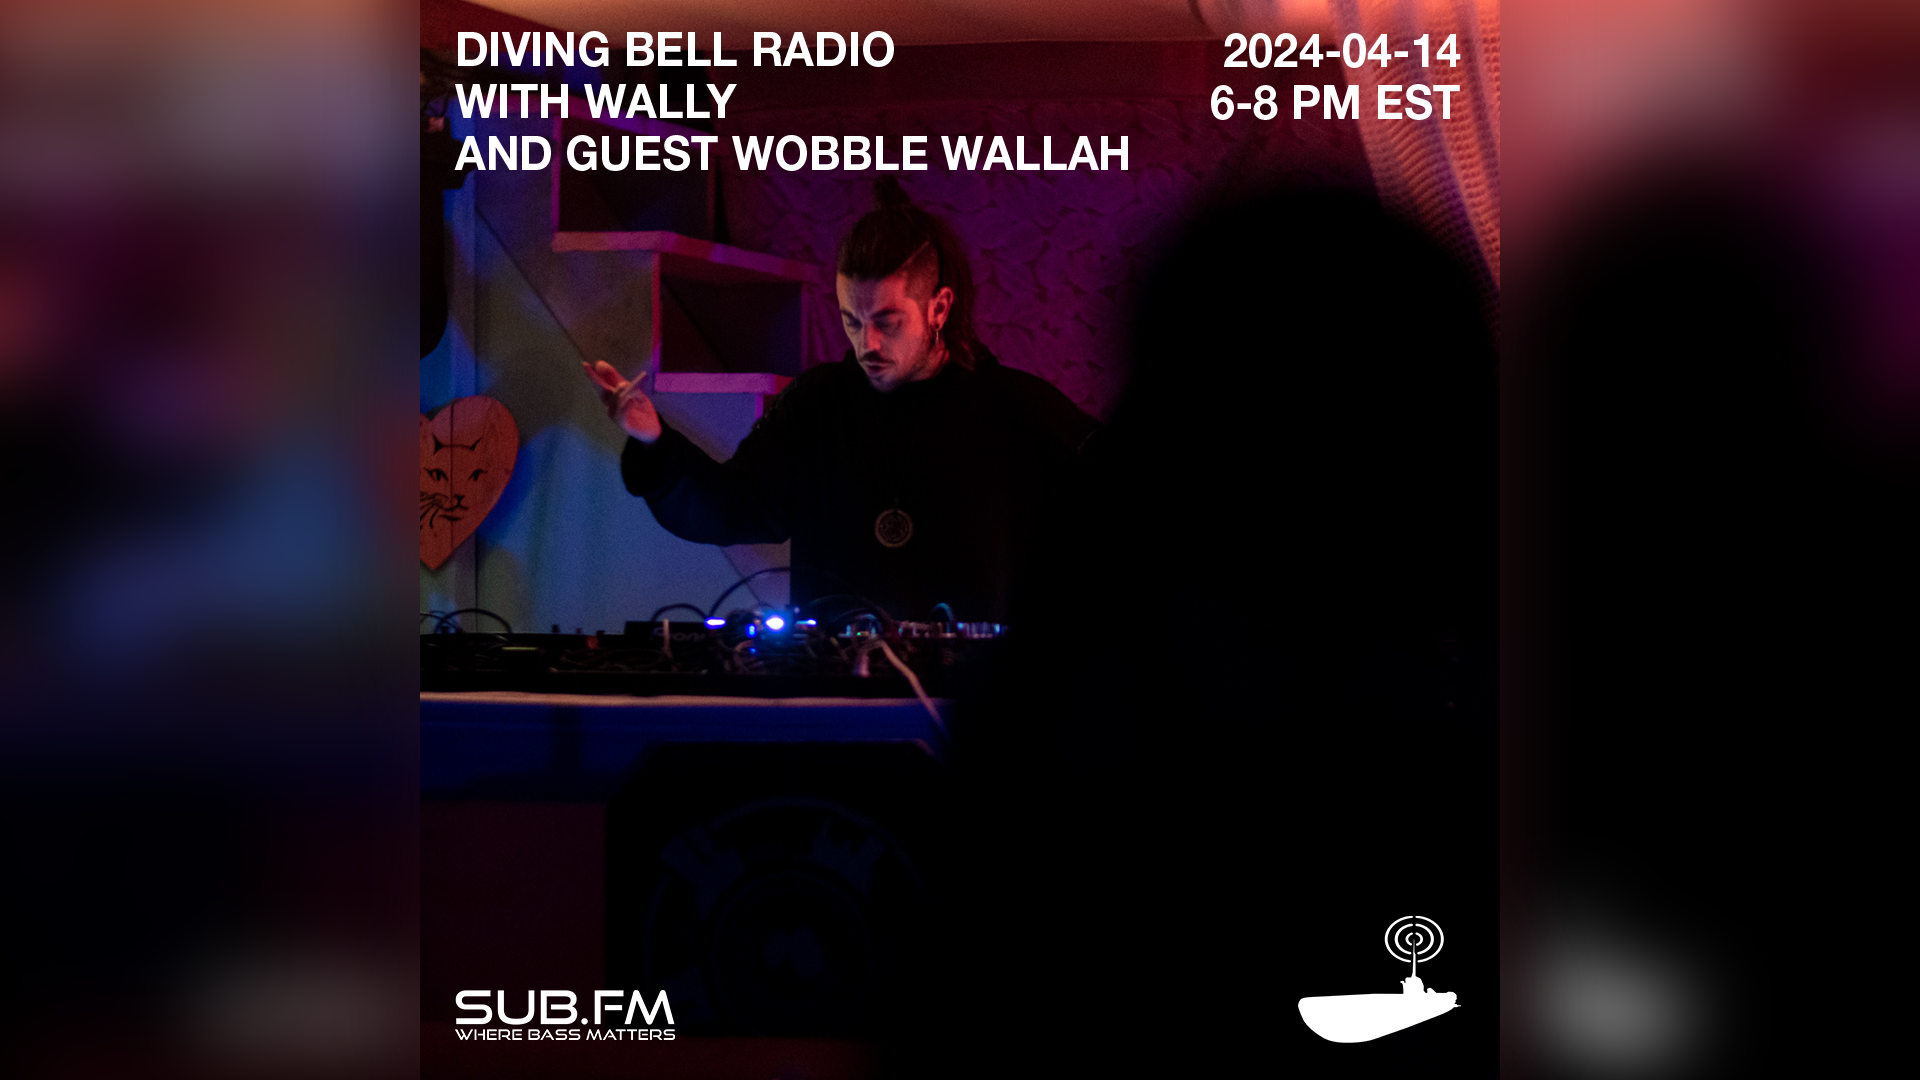 2024-04-14 – Diving bell radio with guest Wobble Wallah